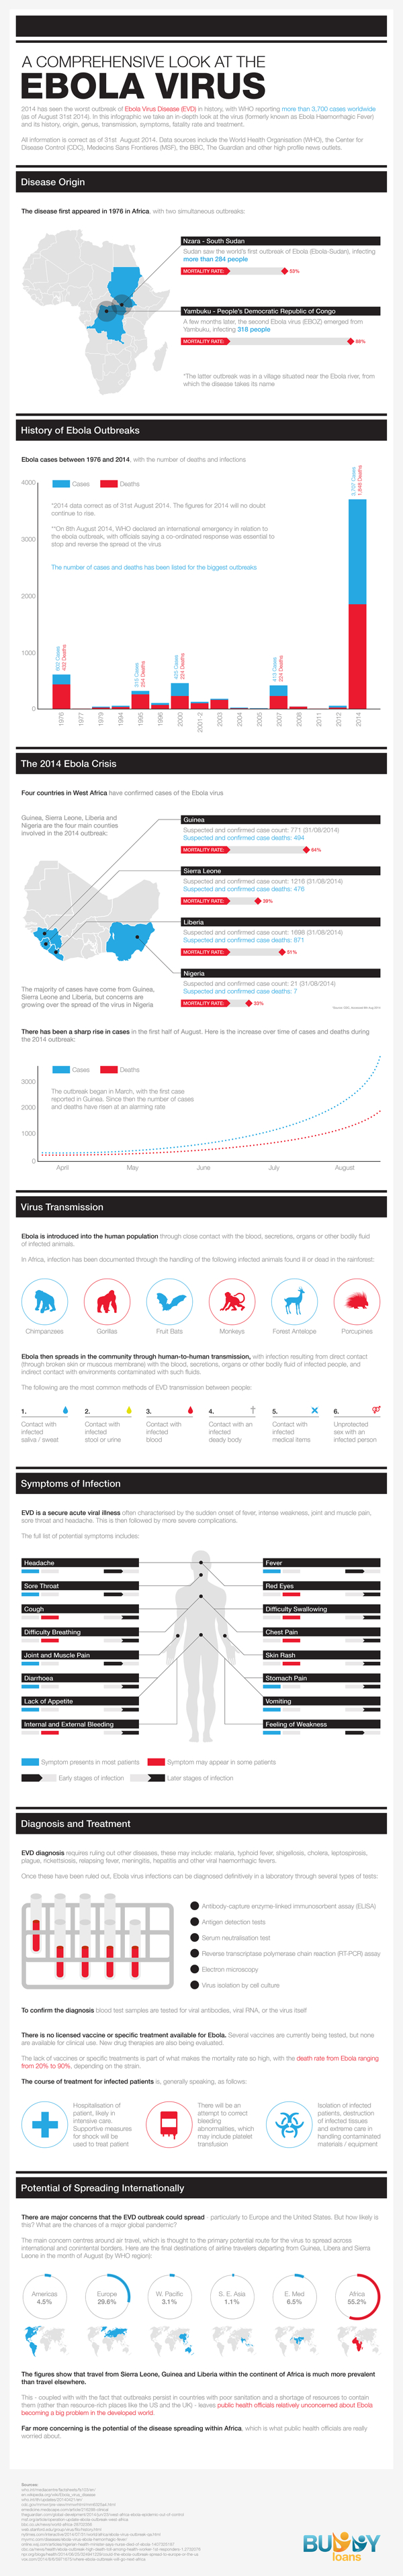 A Comprehensive Look at the Ebola Virus infographic